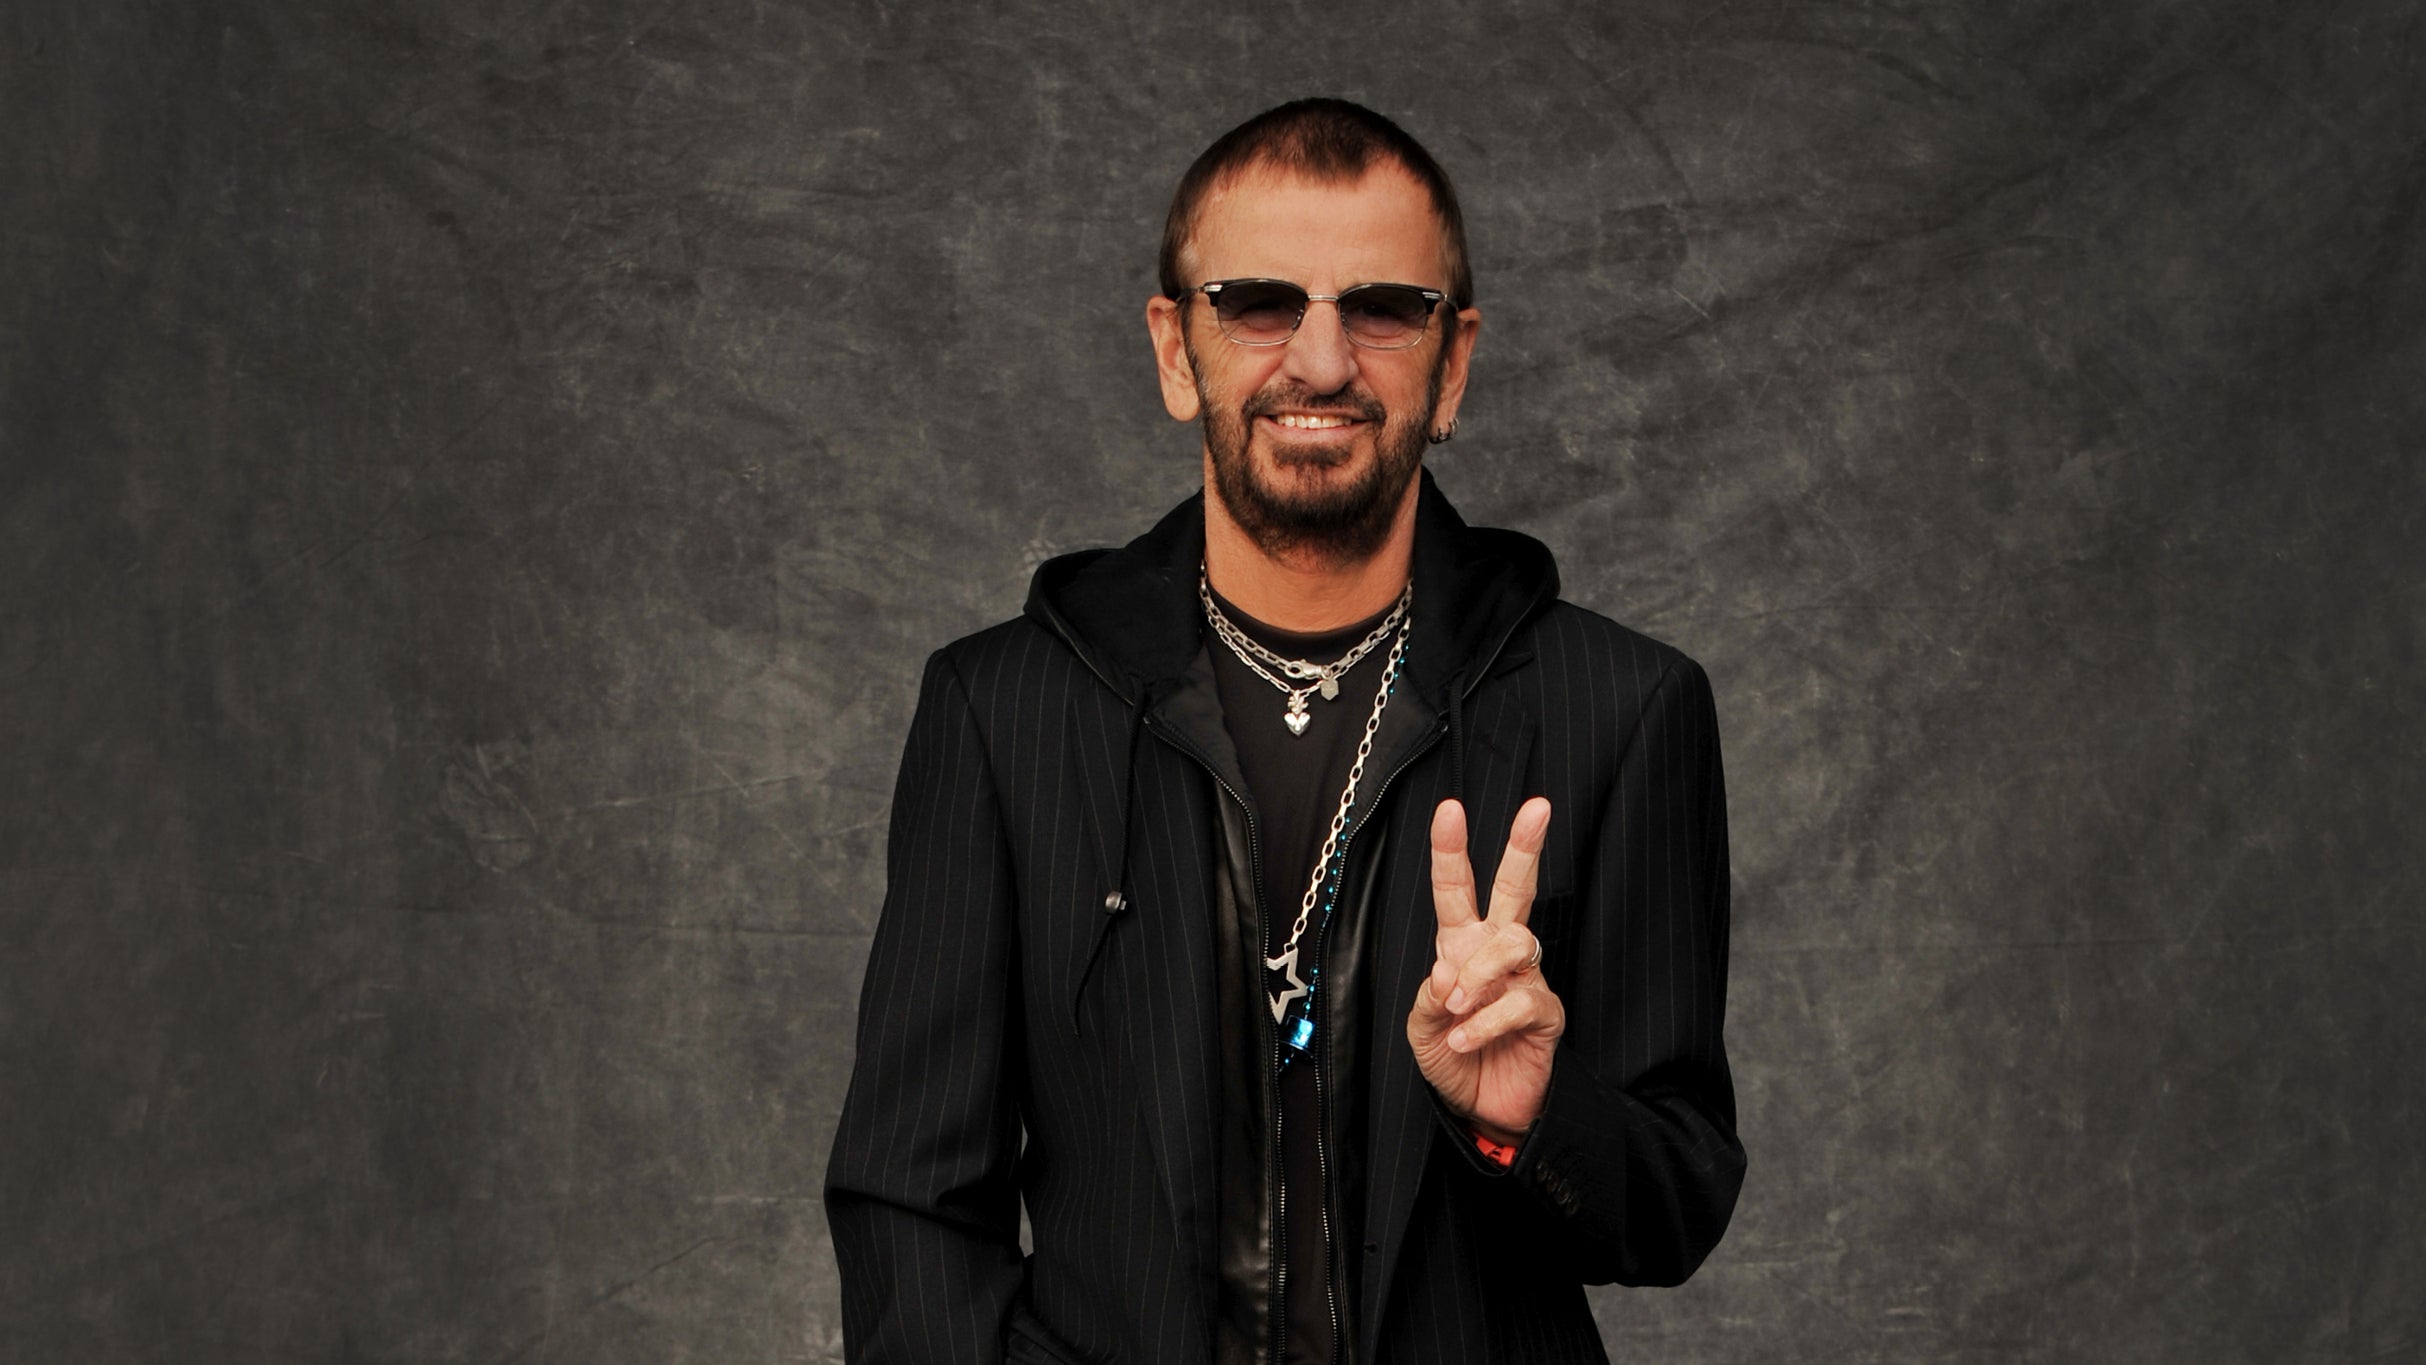 members only presale password to Ringo Starr tickets in New York